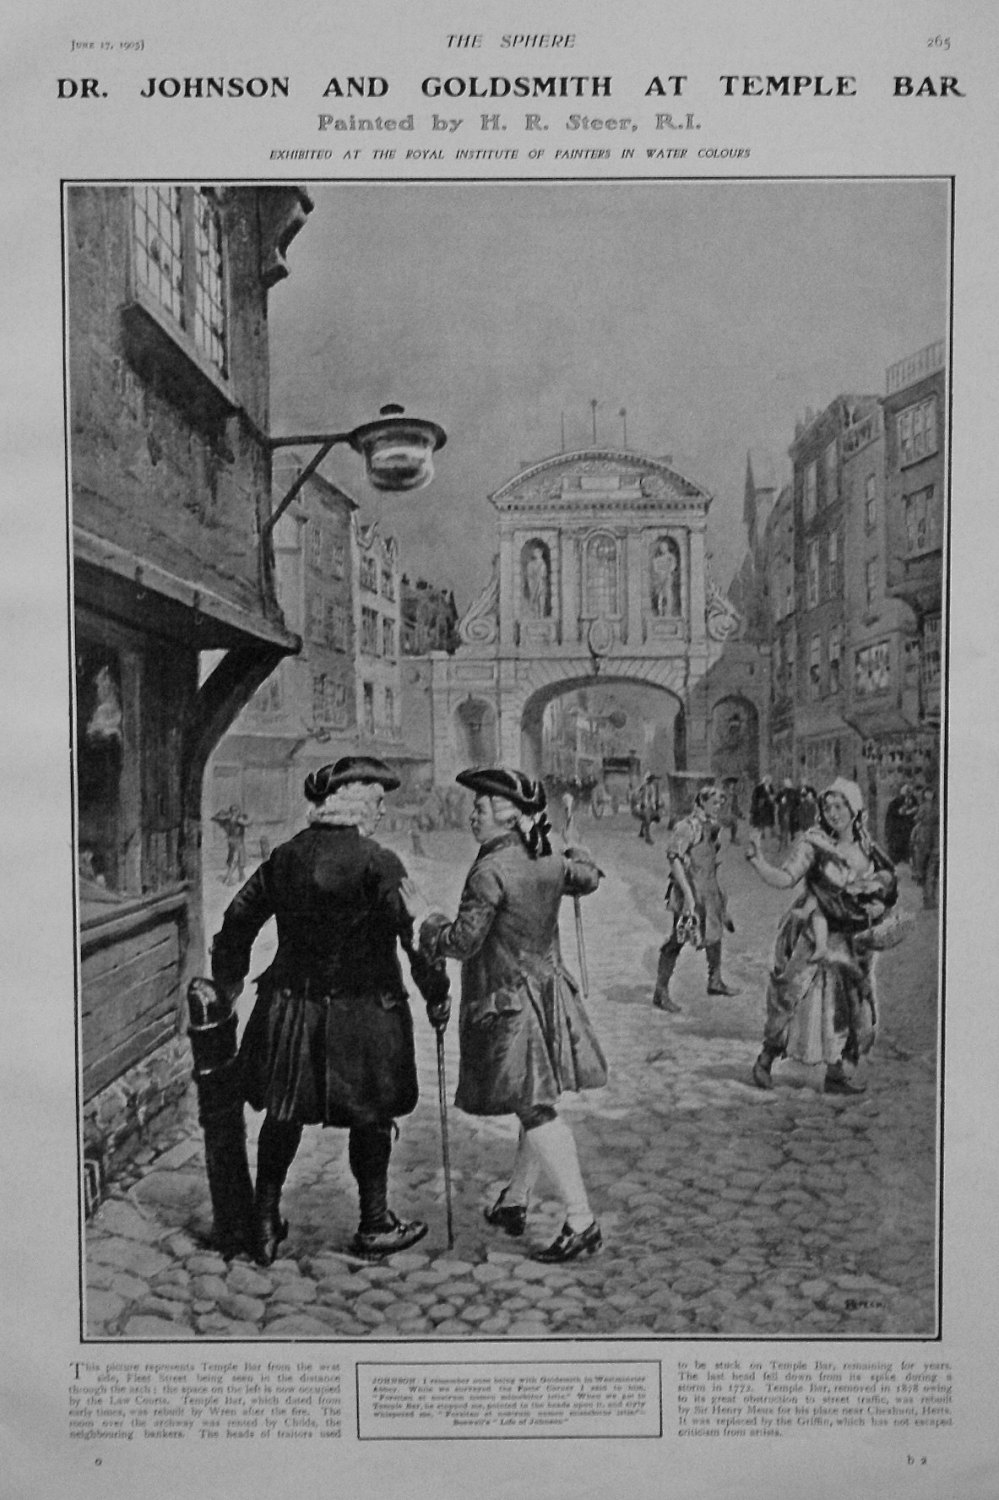 Dr. Johnson and Goldsmith at Temple Bar. Painted by H.R. Steer, R.I. 1905